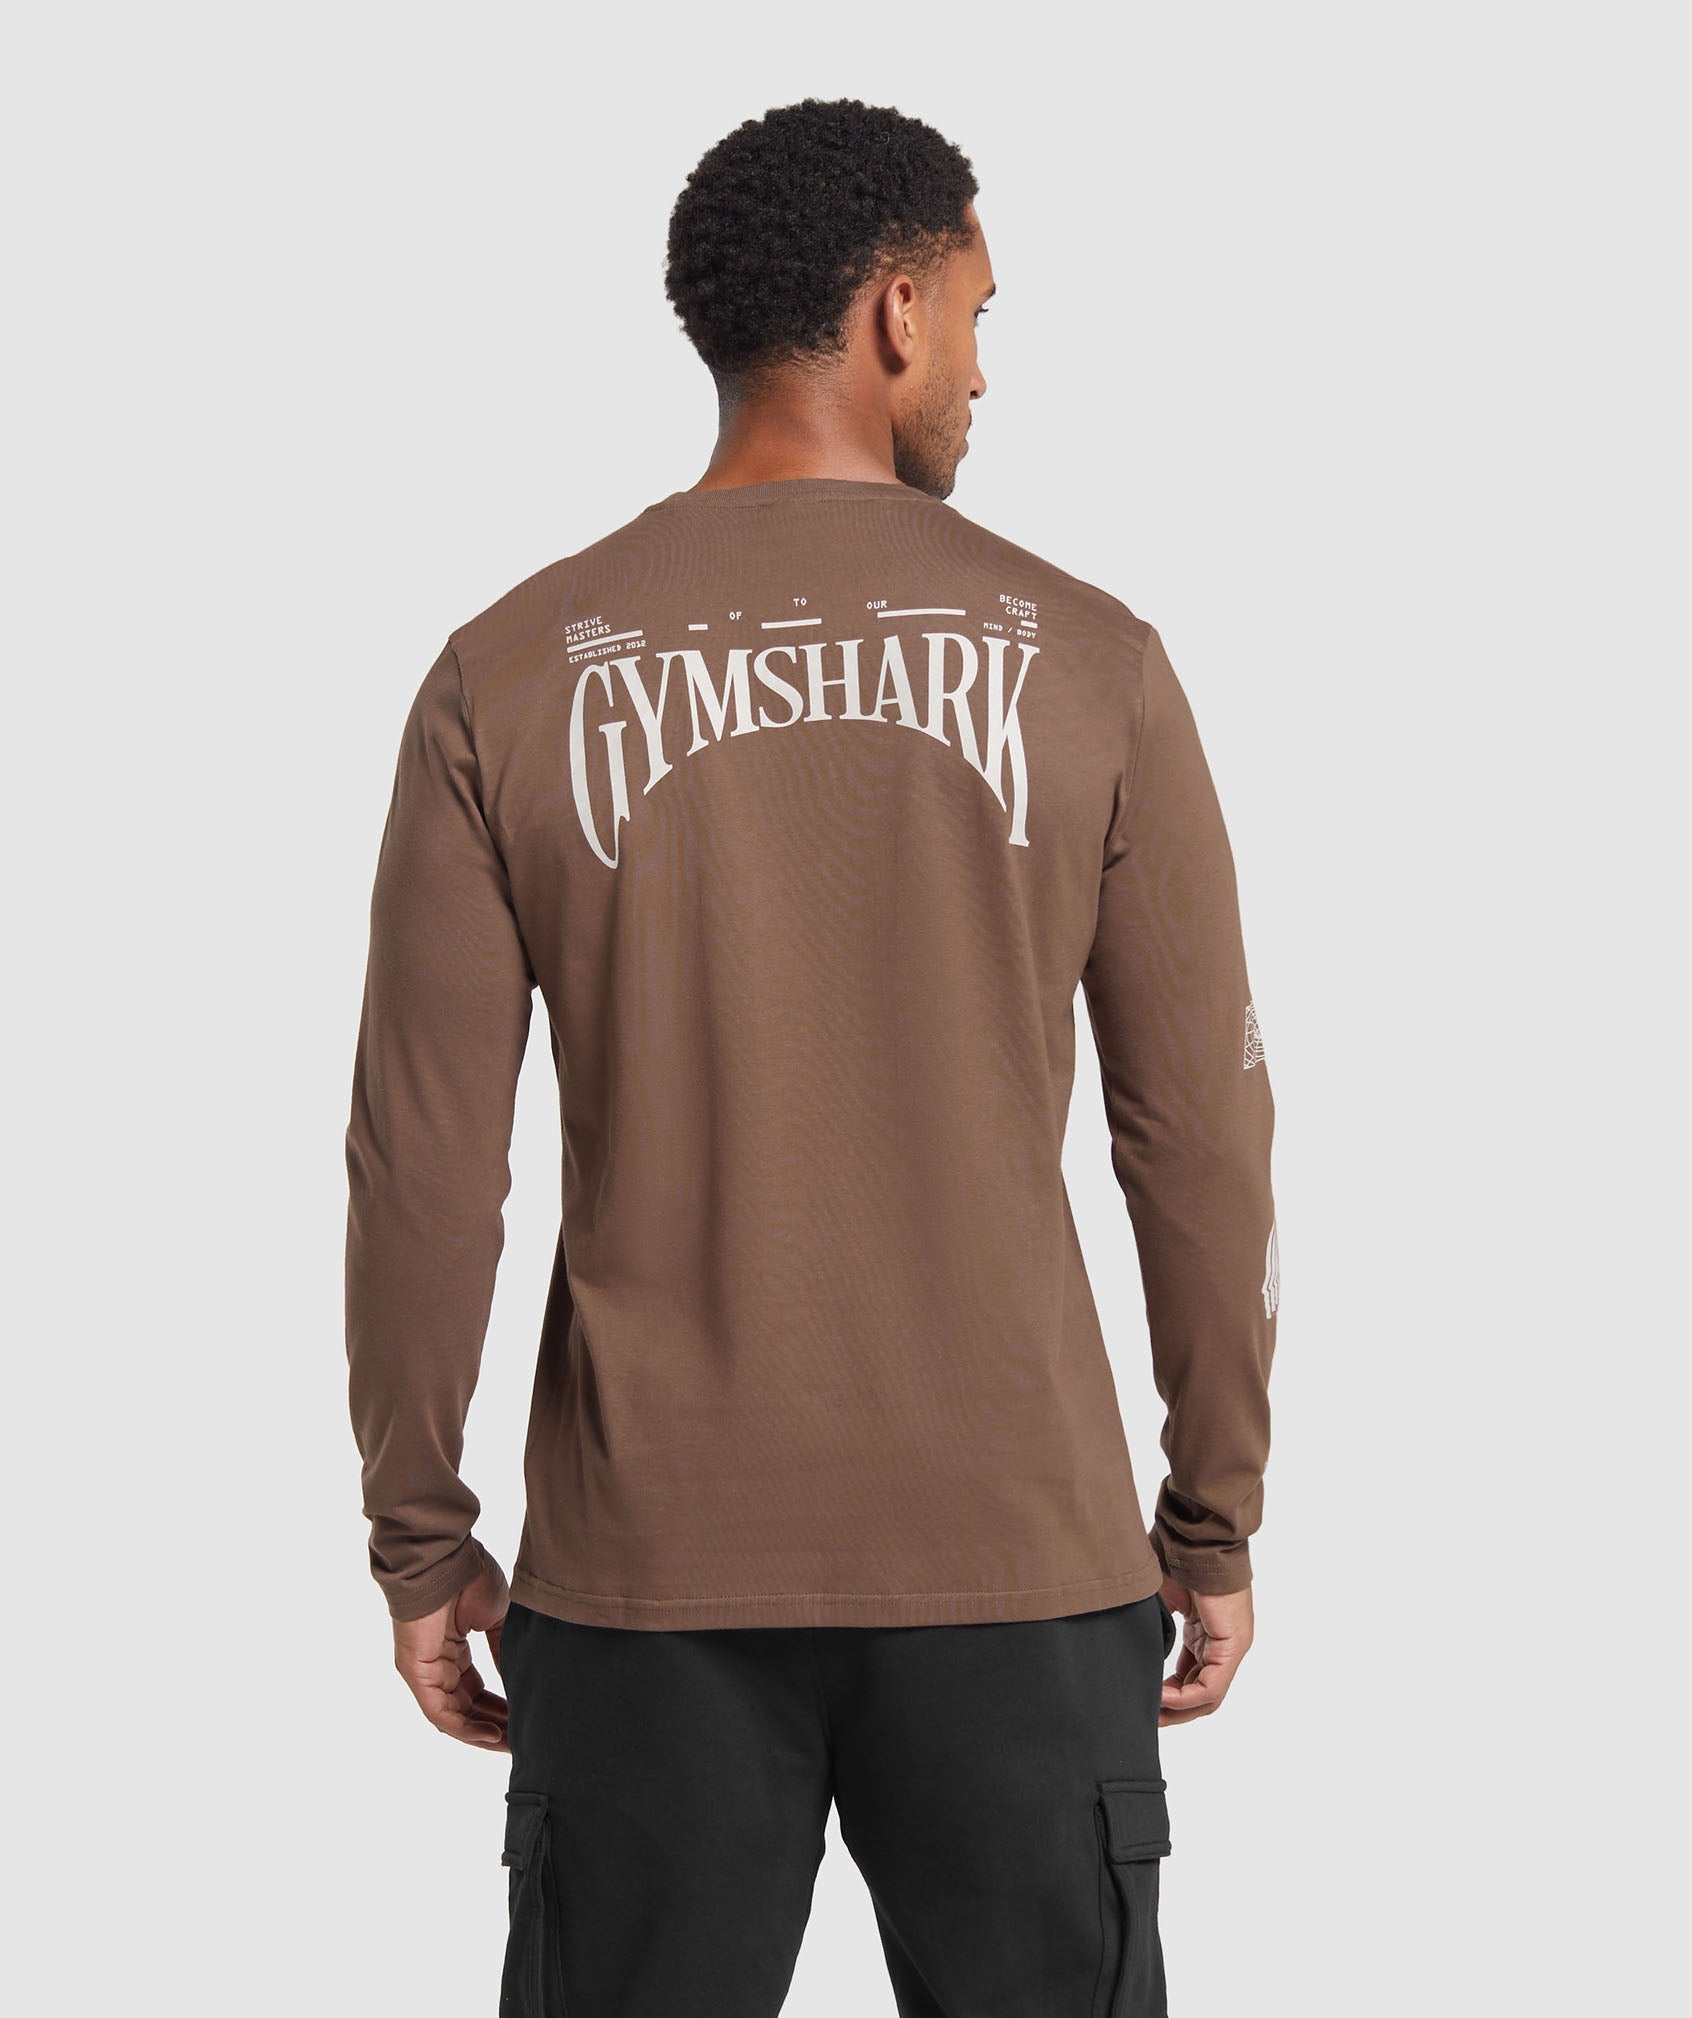 Muscularfit Long Sleeve Tees Mens t Shirts Pack Long Button Up